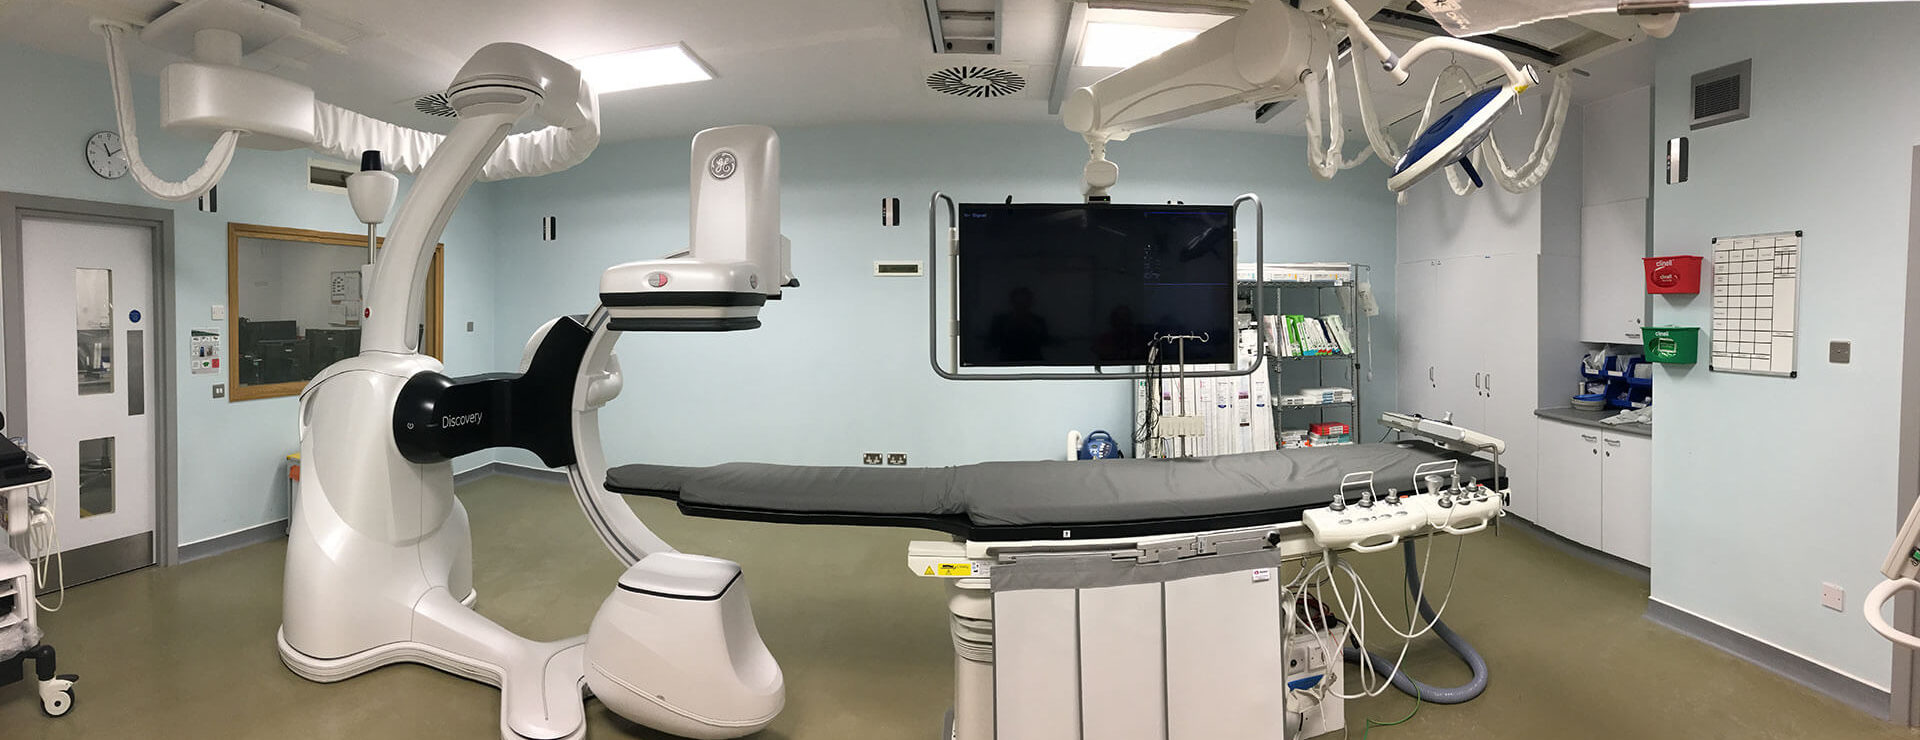 Interventional Suite at KIMS Hospital